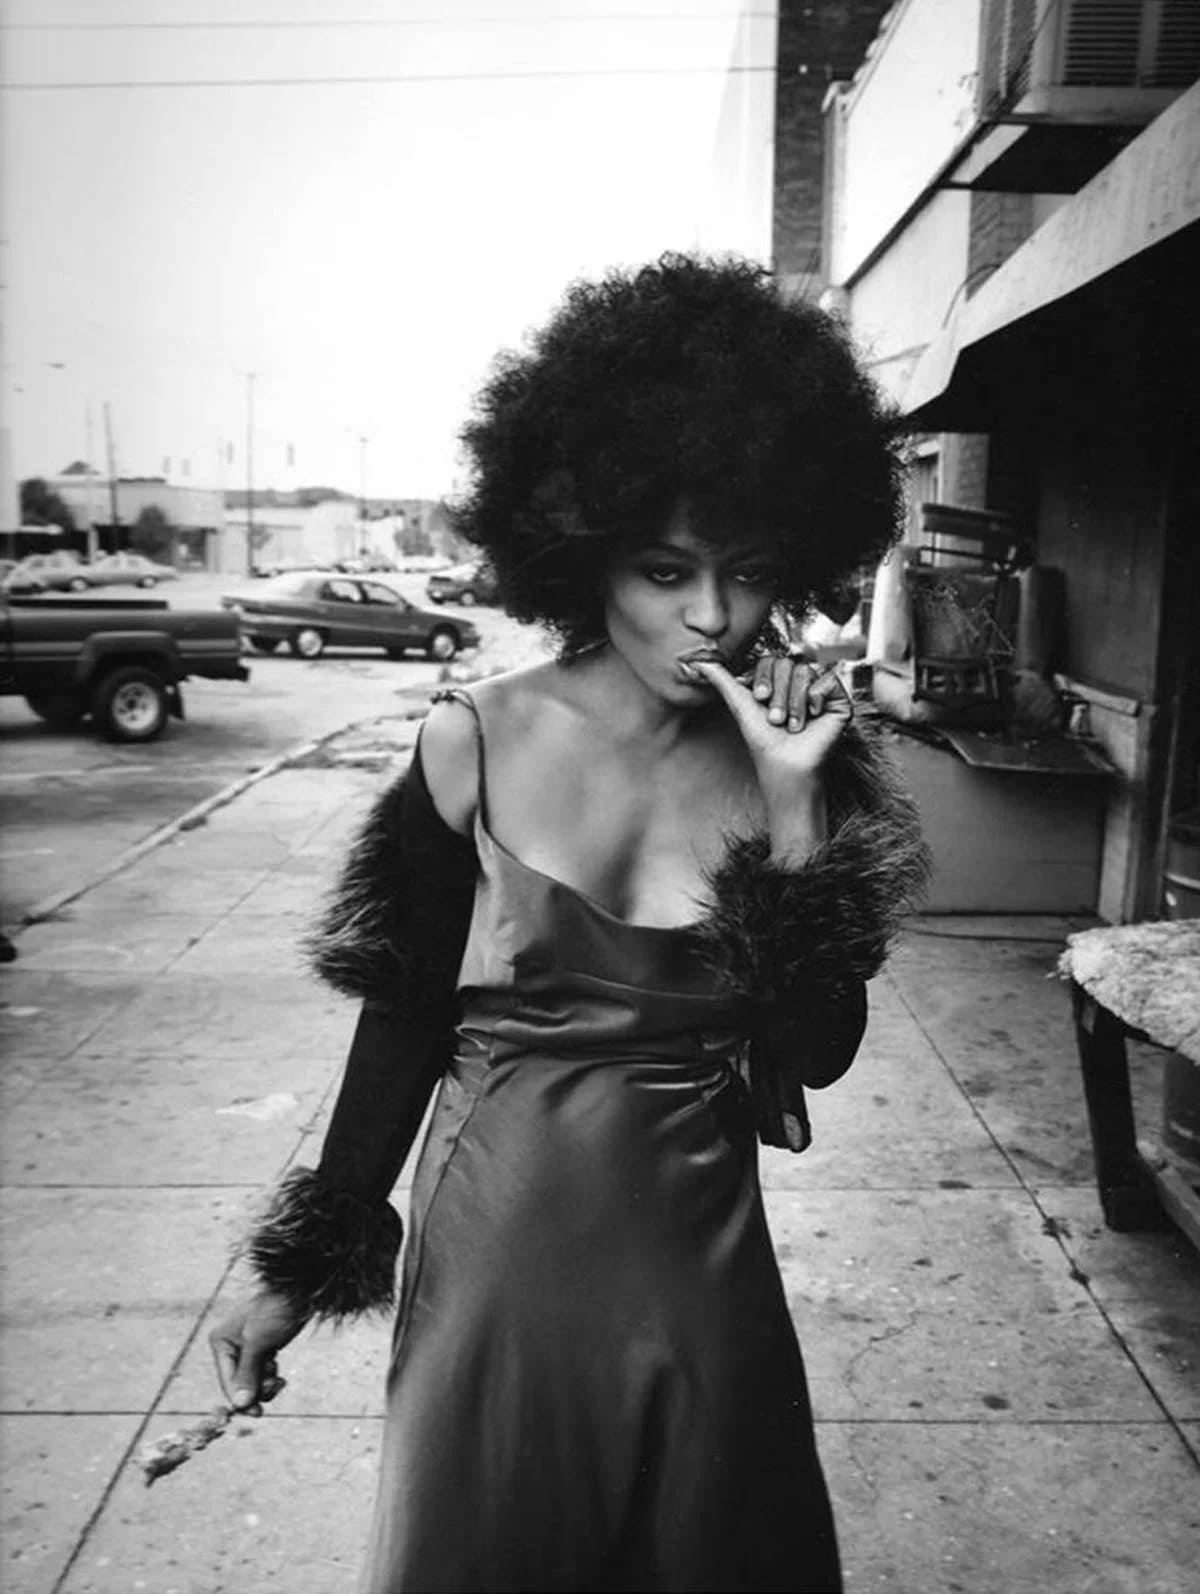 Diana Ross (Diana Ross) in her youth